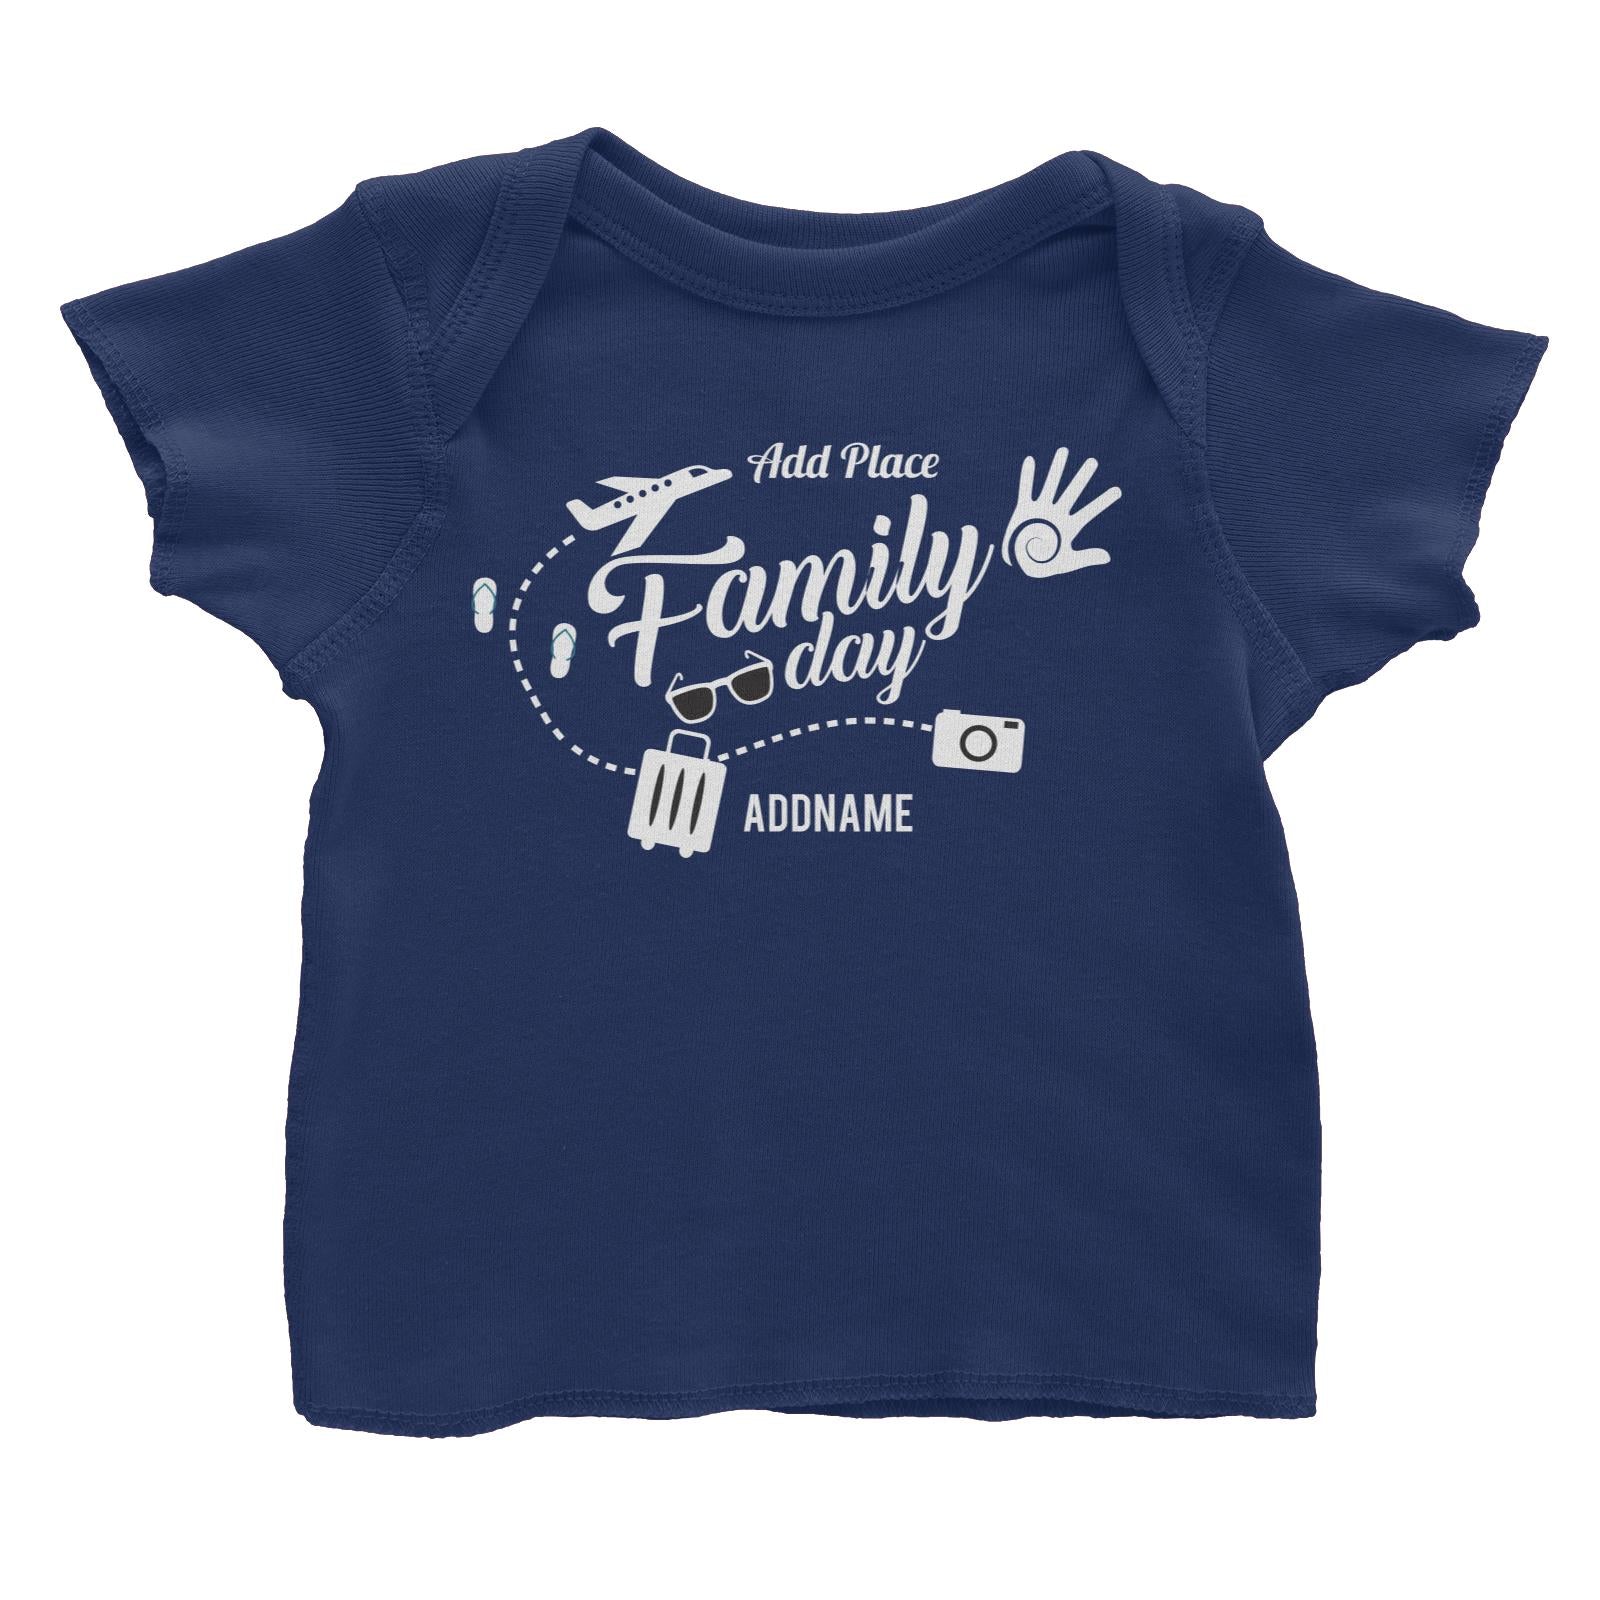 Family Day Flight Vacation Icon Family Day Addname And Add Place Baby T-Shirt